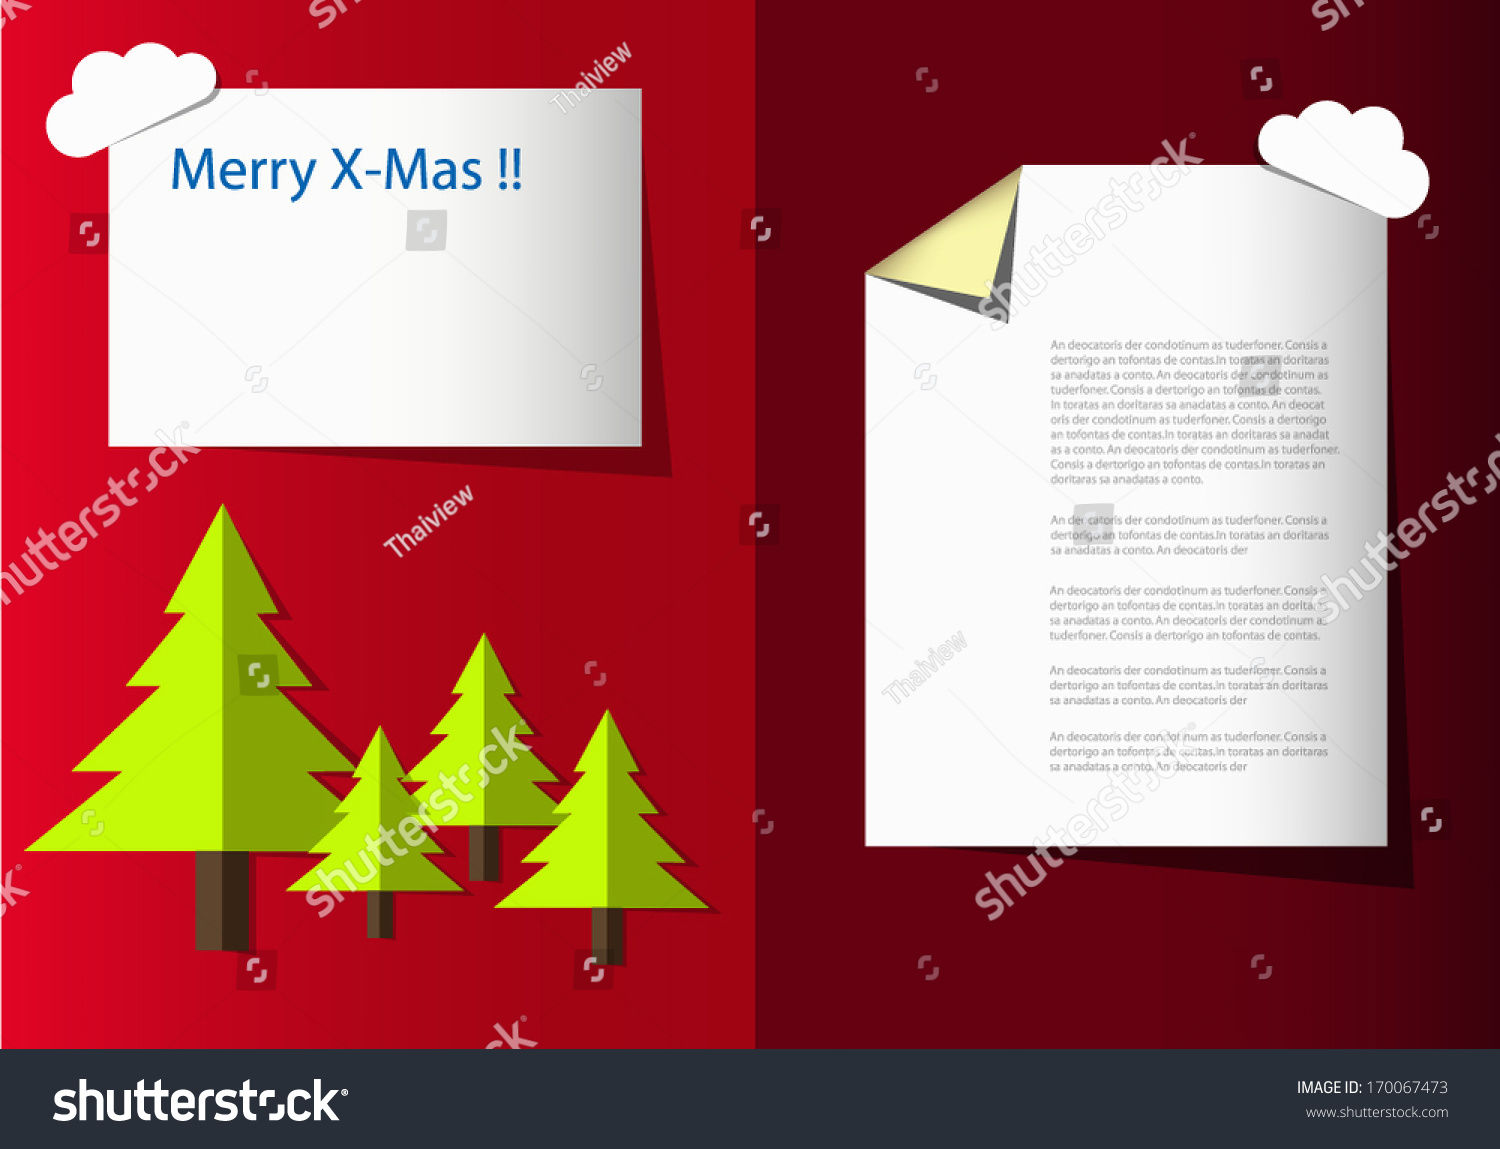 Christmas Note Paper Template from image.shutterstock.com